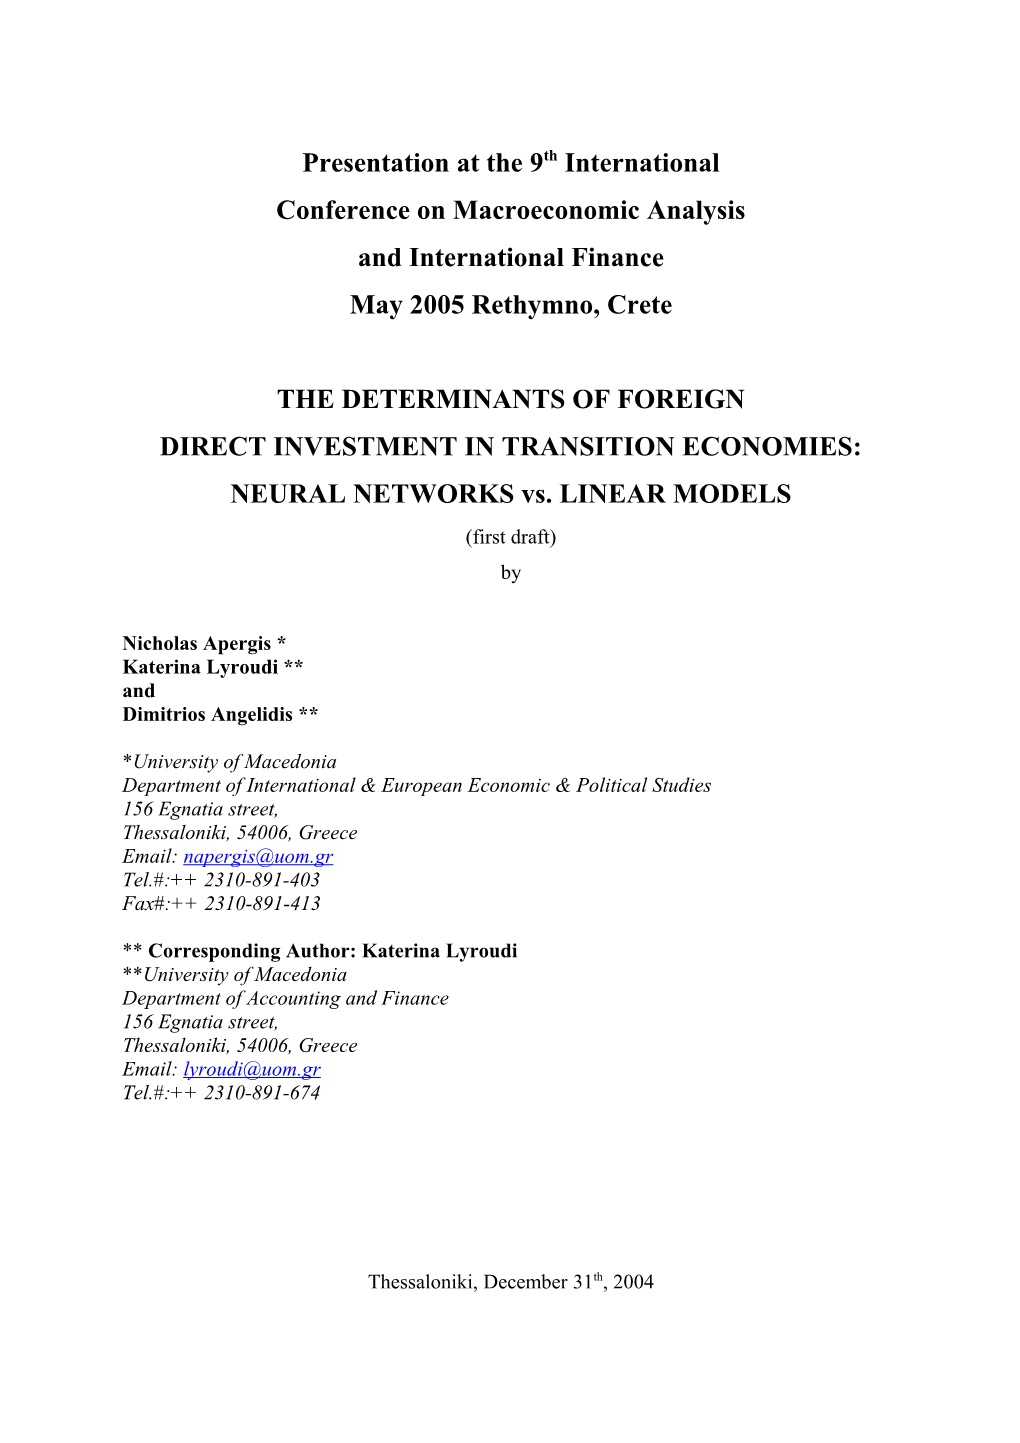 The Relationship Between Foreign Investment and Economic Growth in the Transition Economies